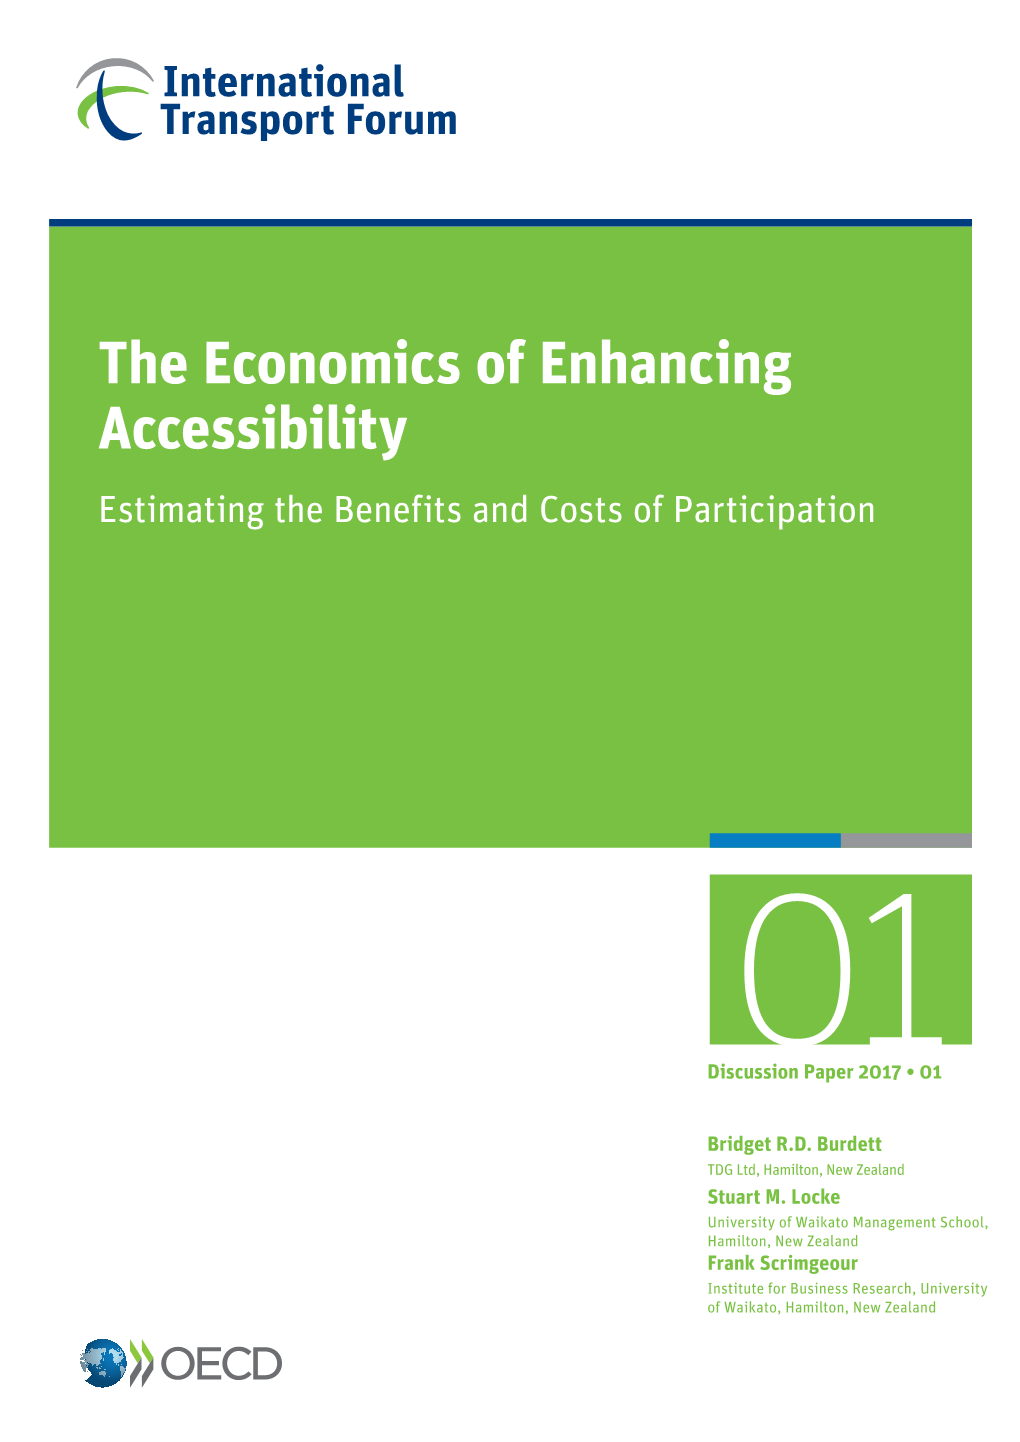 The Economics of Enhancing Accessibility Estimating the Benefits and Costs of Participation